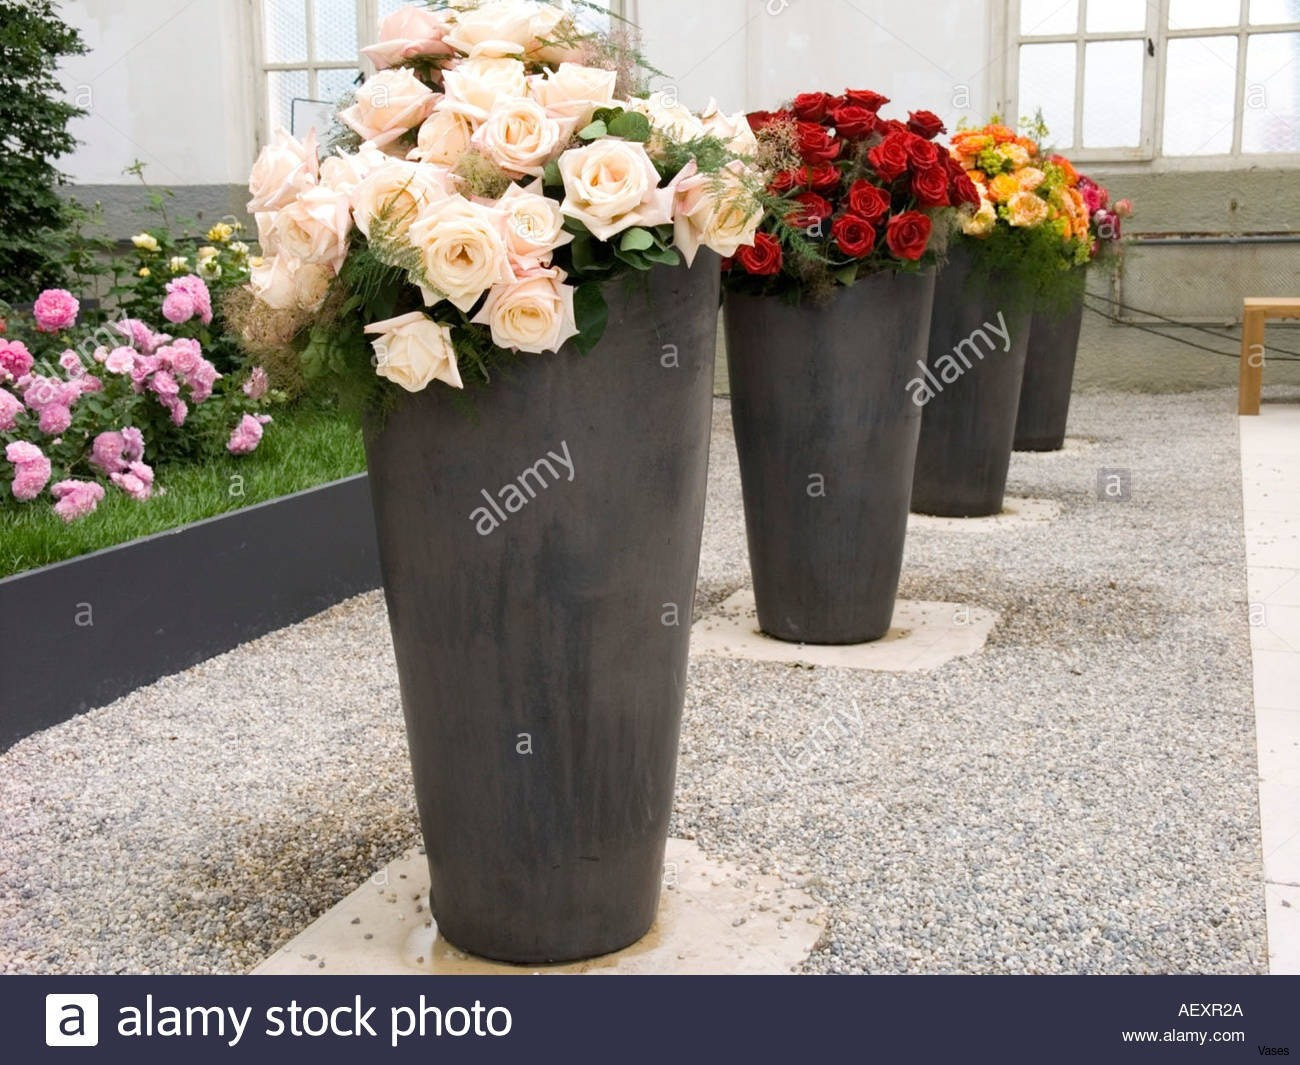 20 Awesome Wedding Flower Vases 2024 free download wedding flower vases of wedding photos uk lovely articles with flower vases for sale tag big within articles with flower vases for sale tag big vase l vasei 0d uk